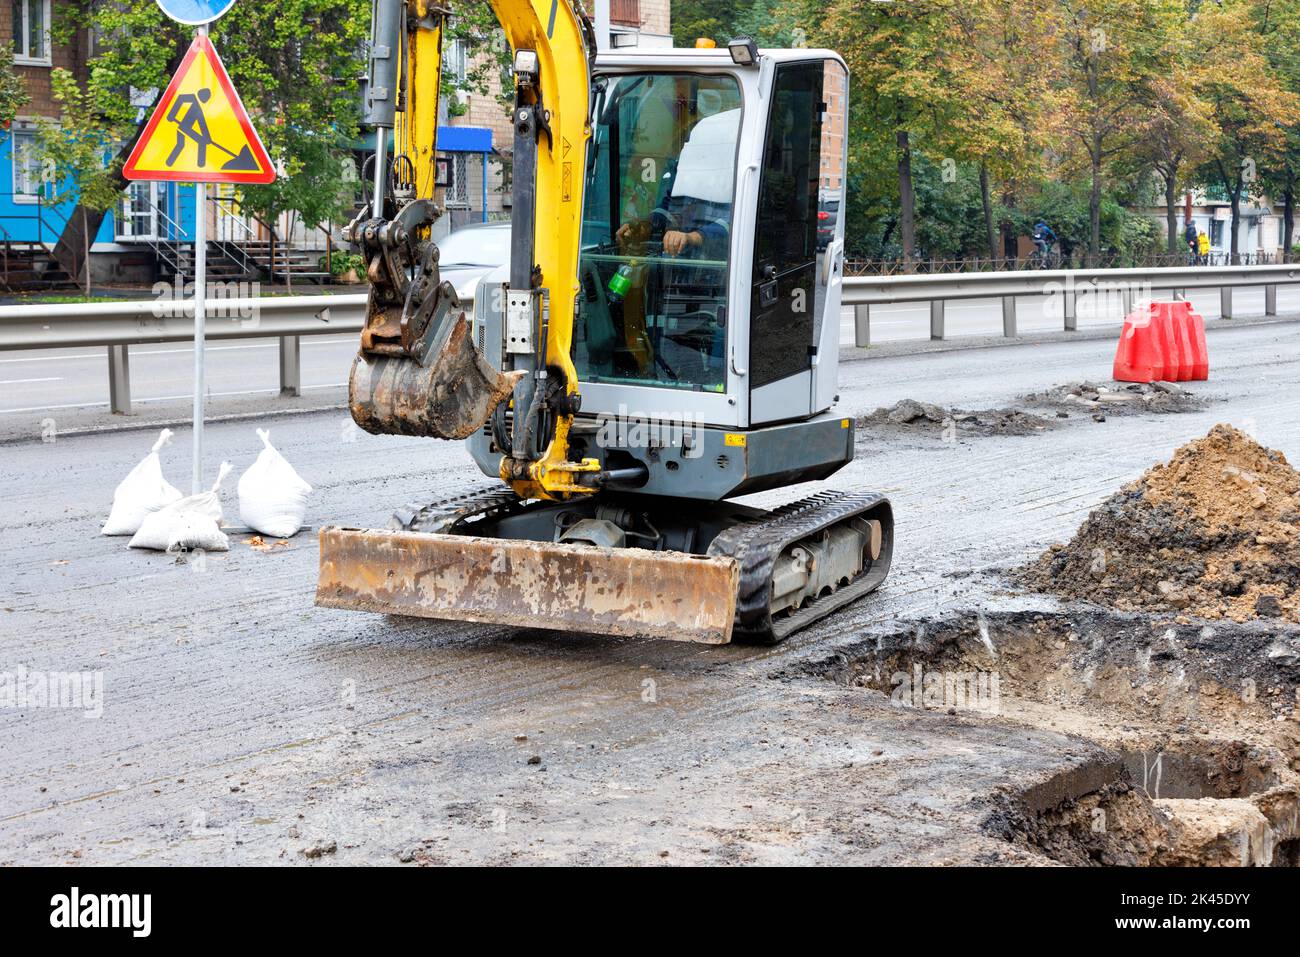 A small road excavator at work repairing the city's sewer infrastructure on a fenced roadway. Copy space. Stock Photo